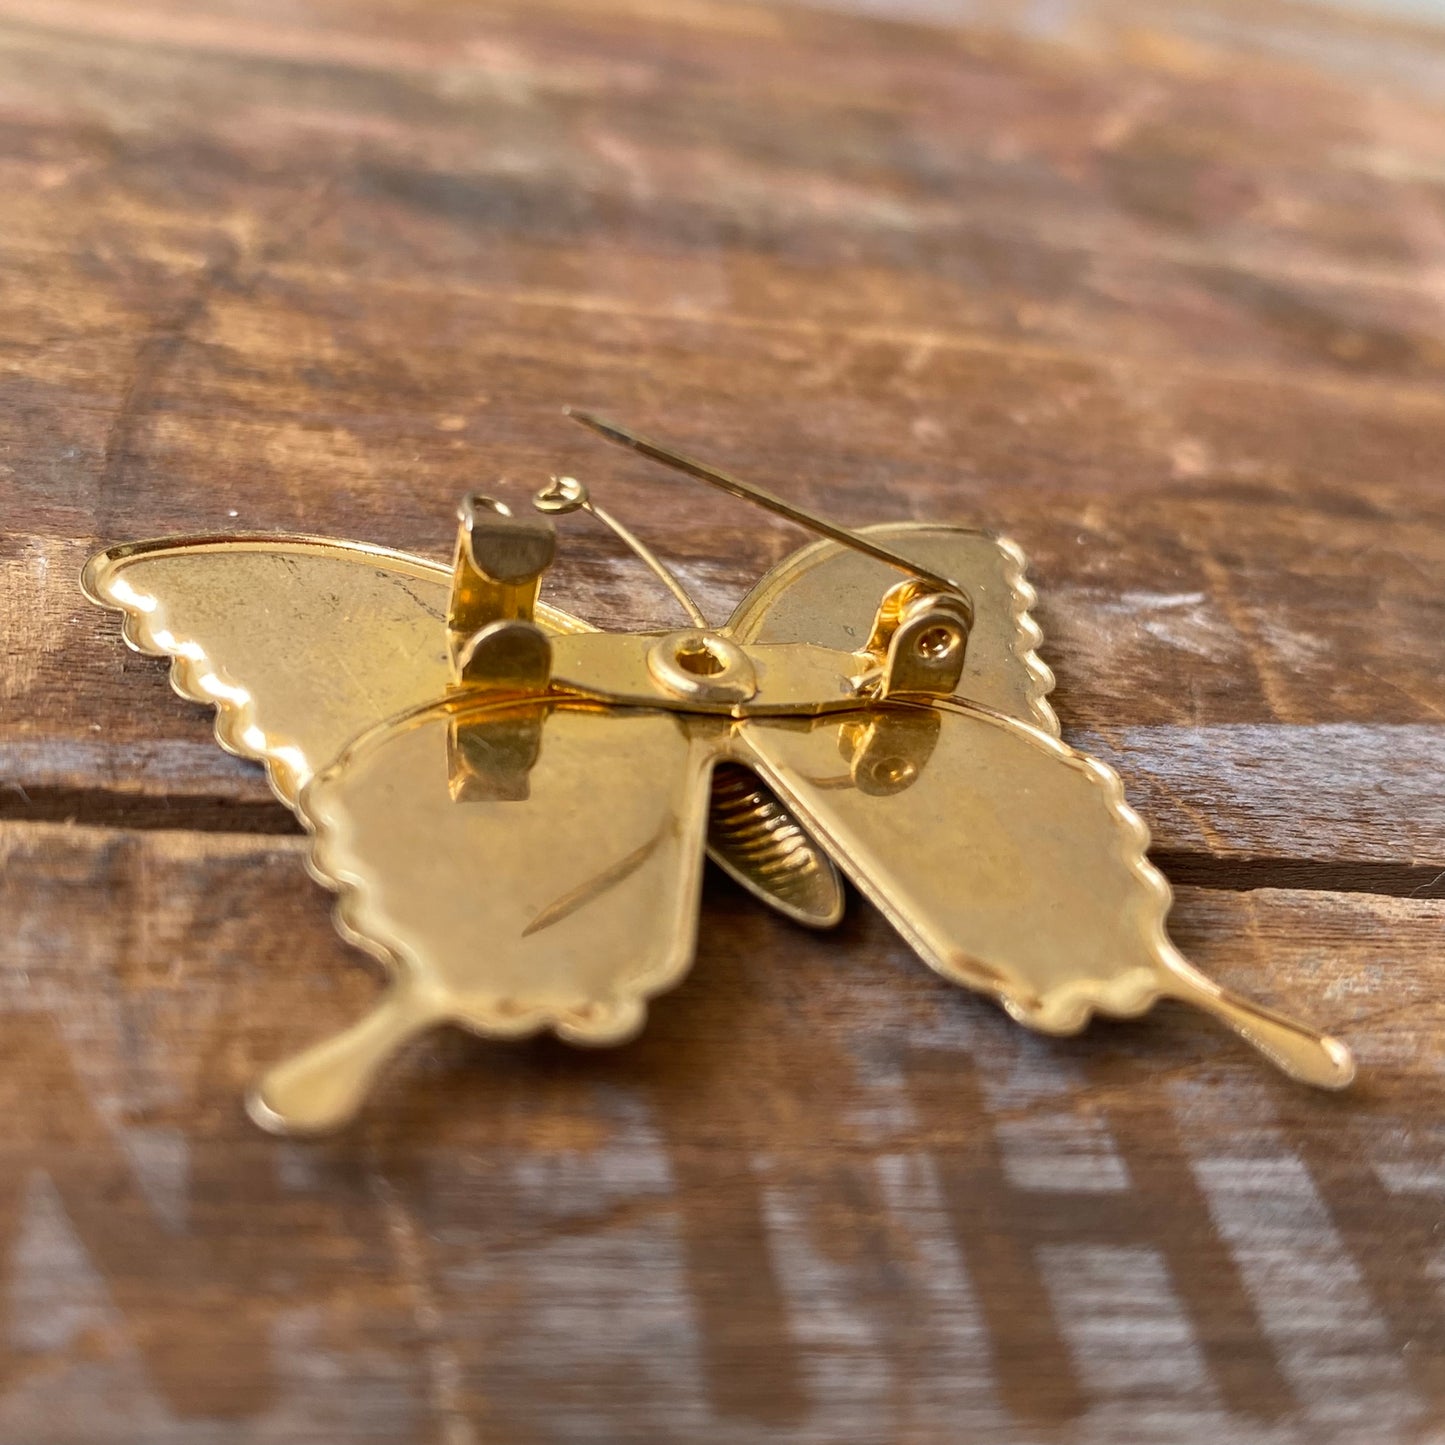 【vintage】butterfly brooch 蝶々 ブローチ ラメ